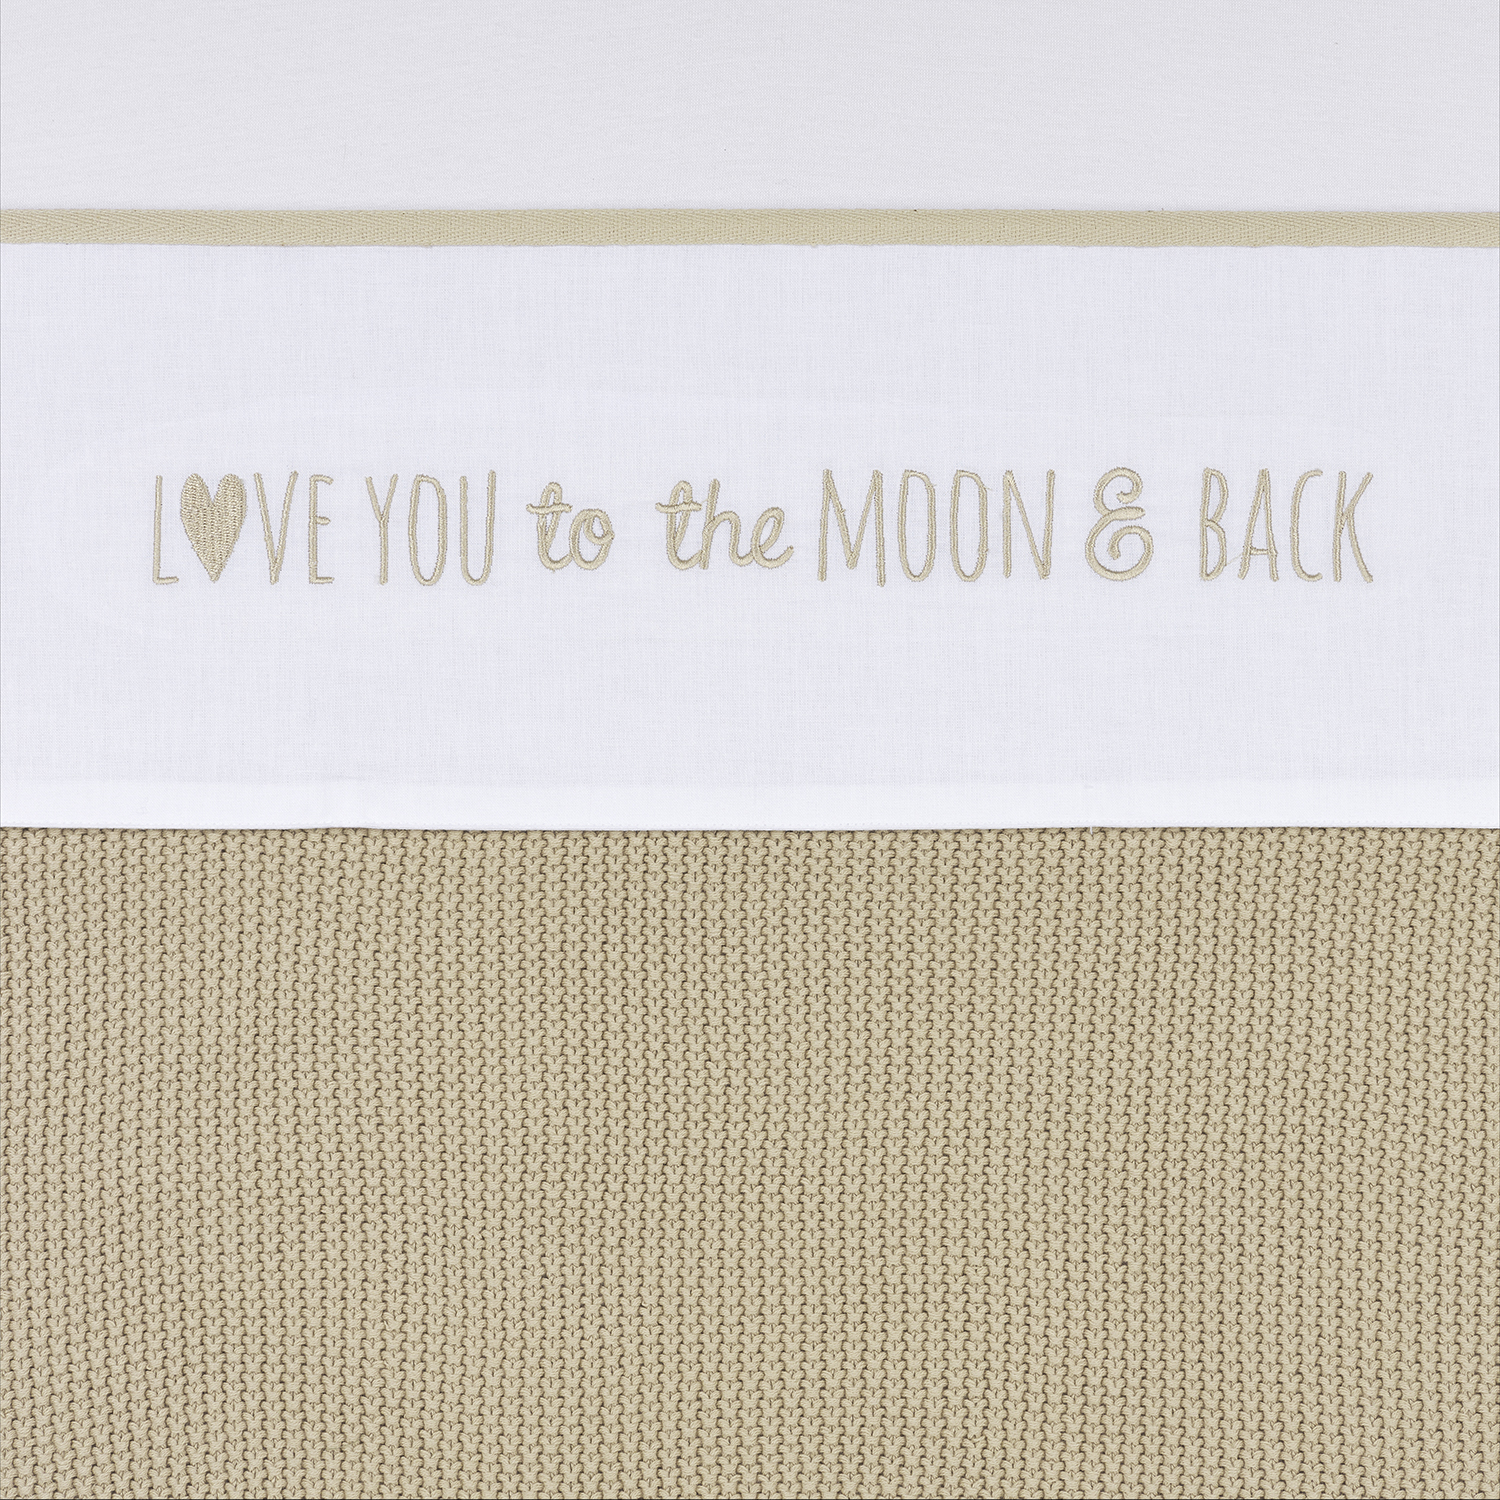 Crib sheet Love you to the moon & back - sand - 75X100cm